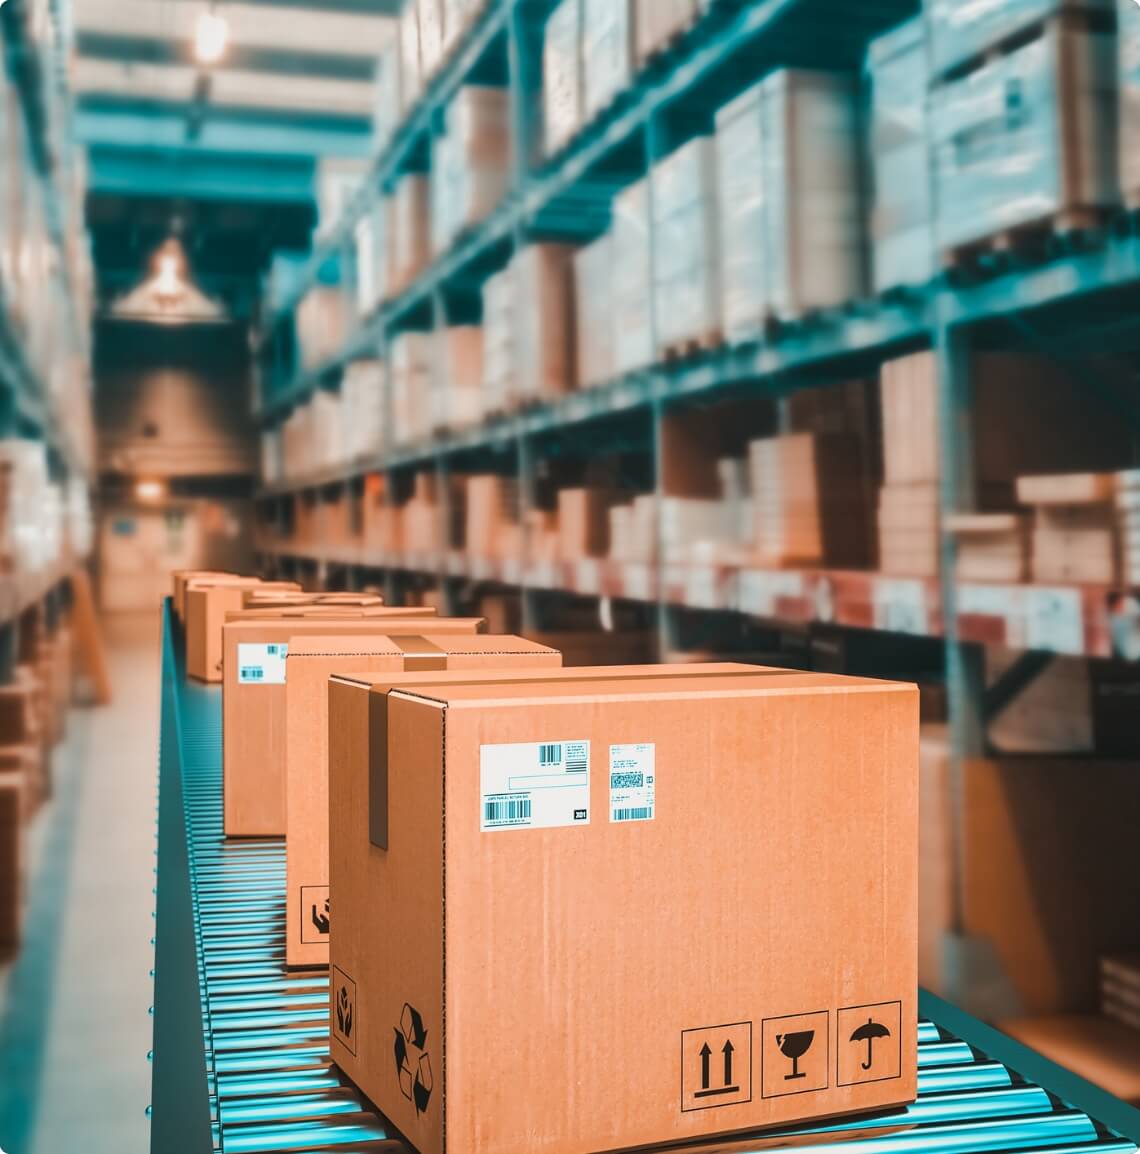 Boxes on a conveyor belt in a warehouse